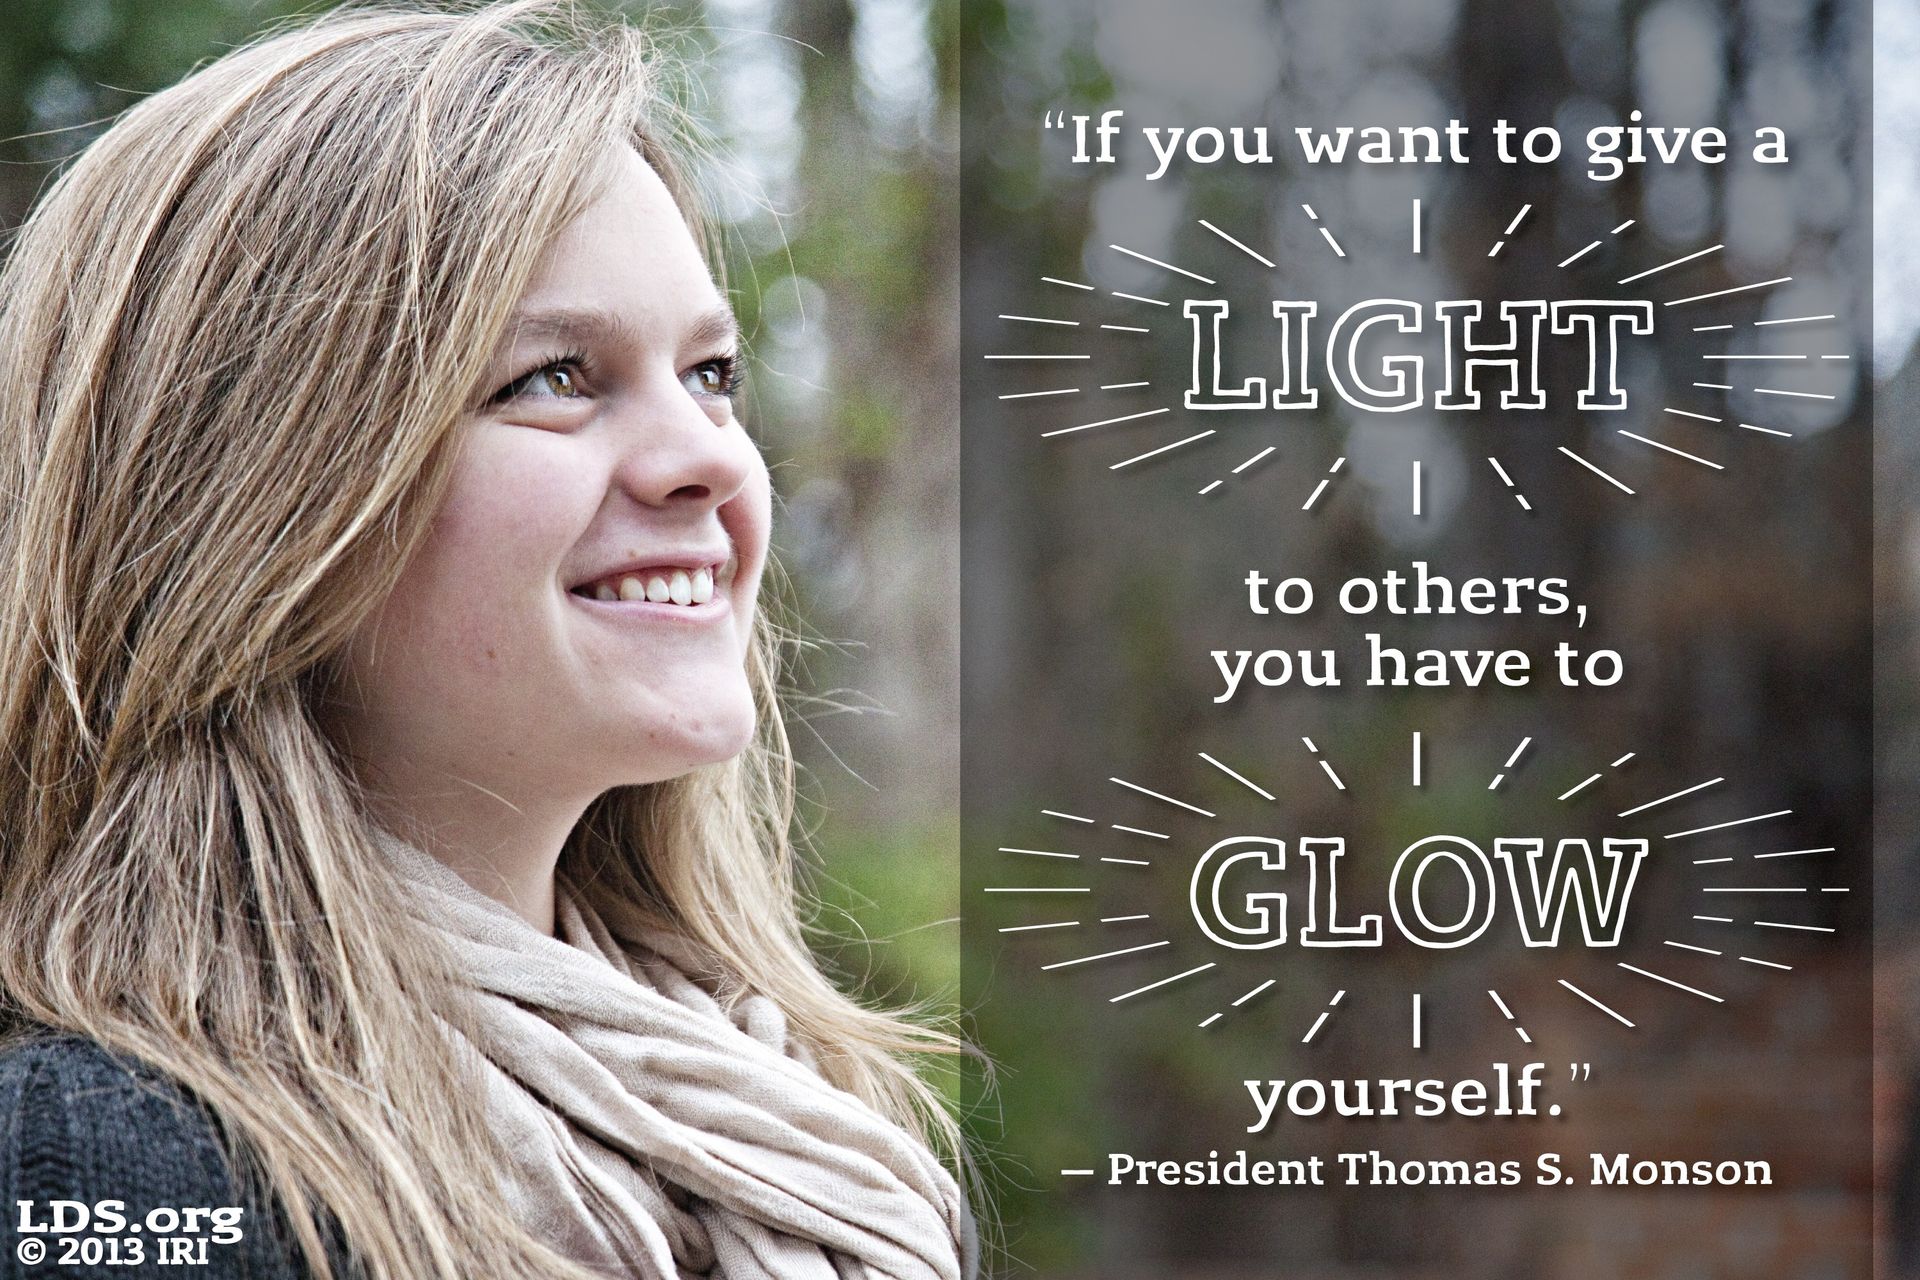 “If you want to give a light to others, you have to glow yourself.”—President Thomas S. Monson, “For I Was Blind, but Now I See.” © undefined ipCode 1.